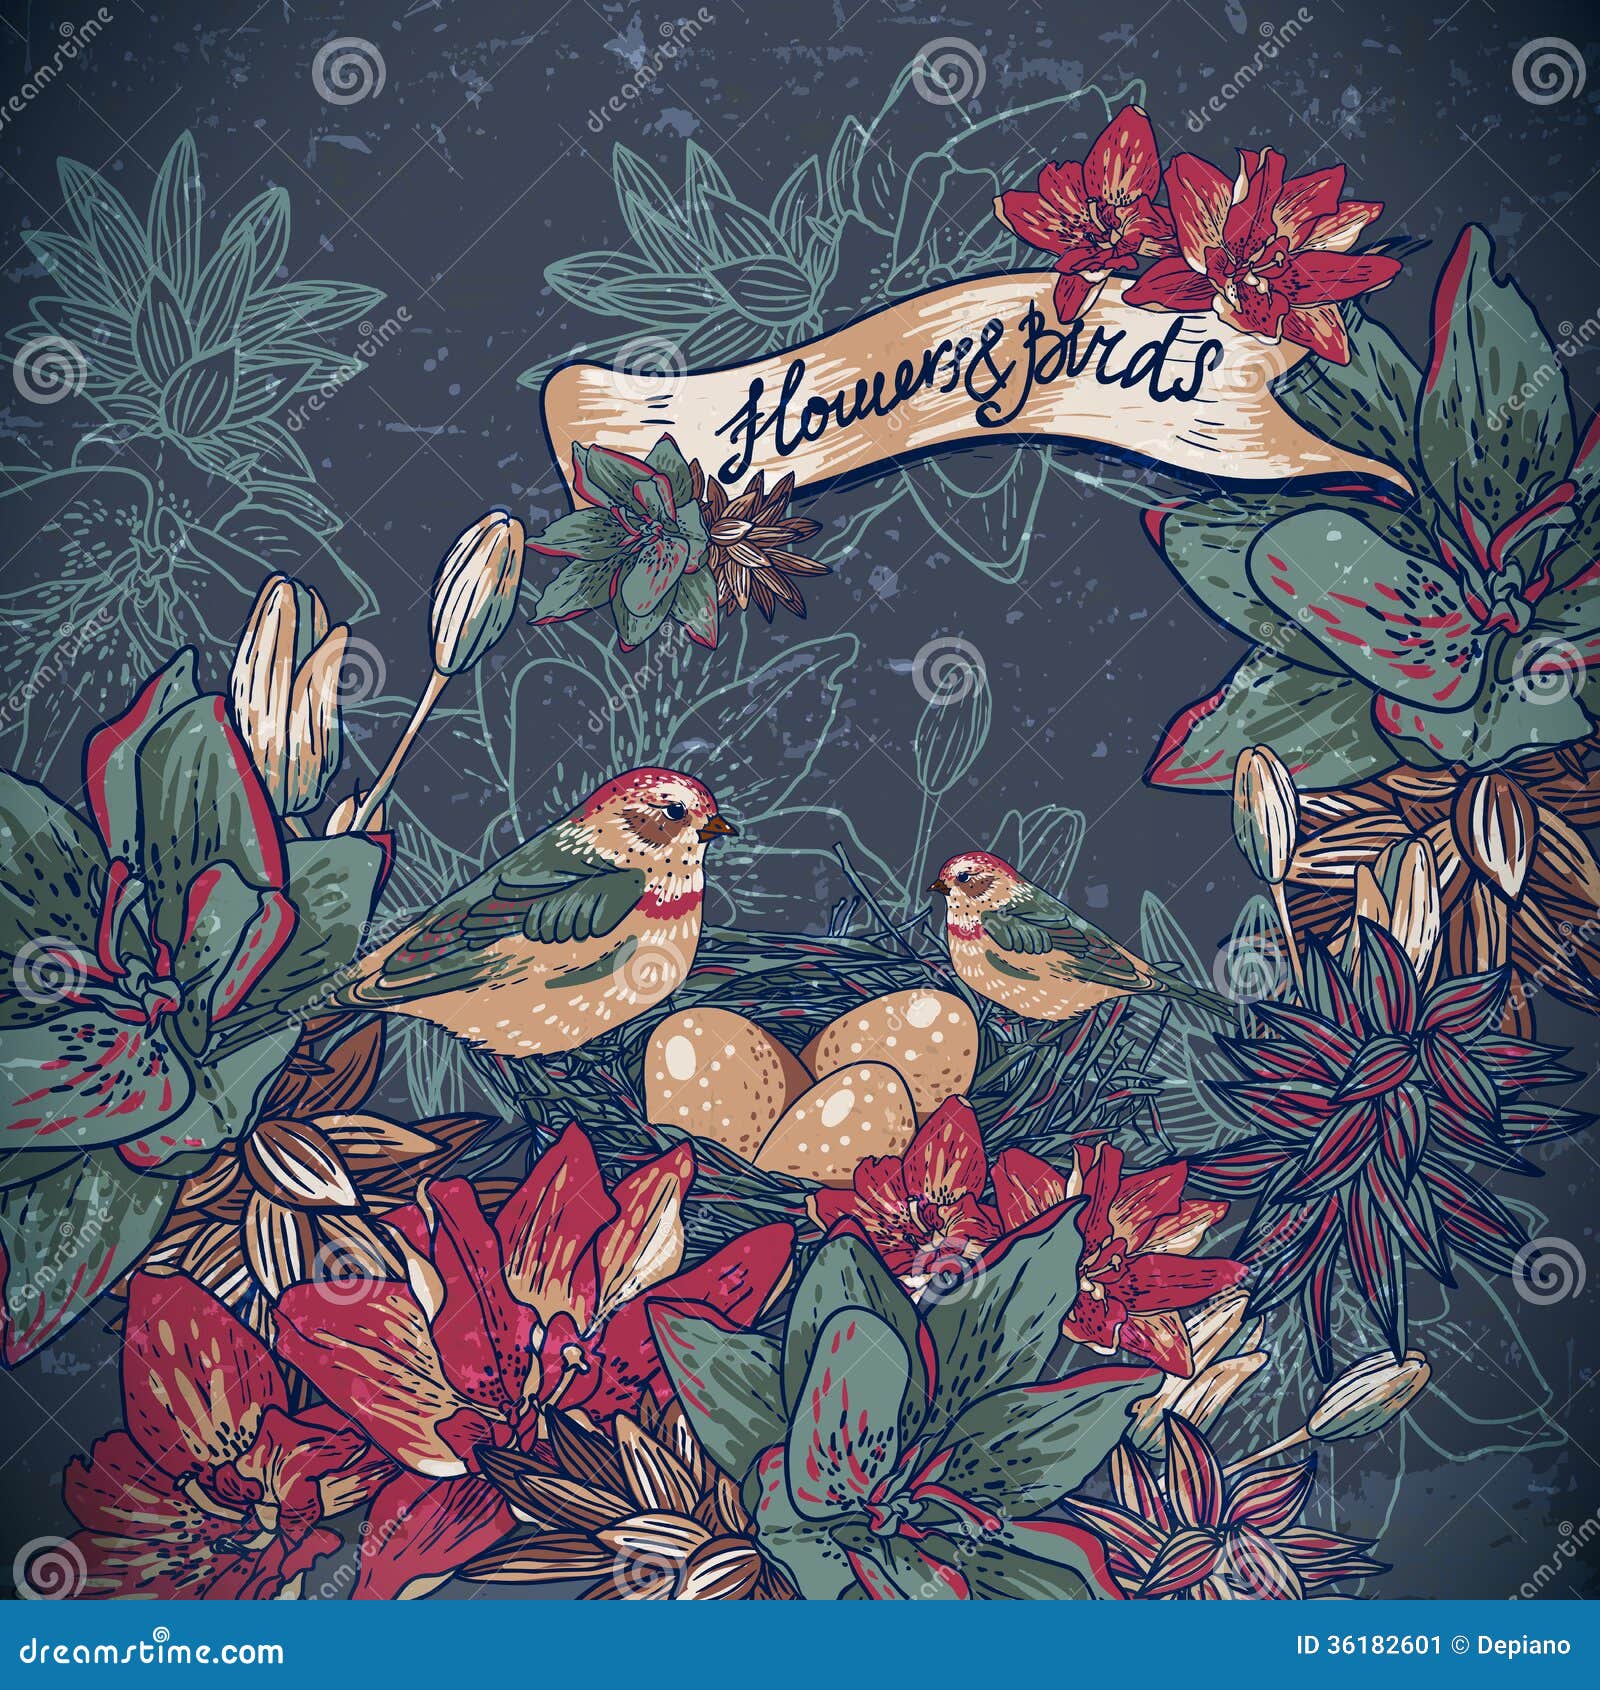 tumblr backgrounds flowers vintage Viewing Gallery Vintage  Backgrounds  Birds